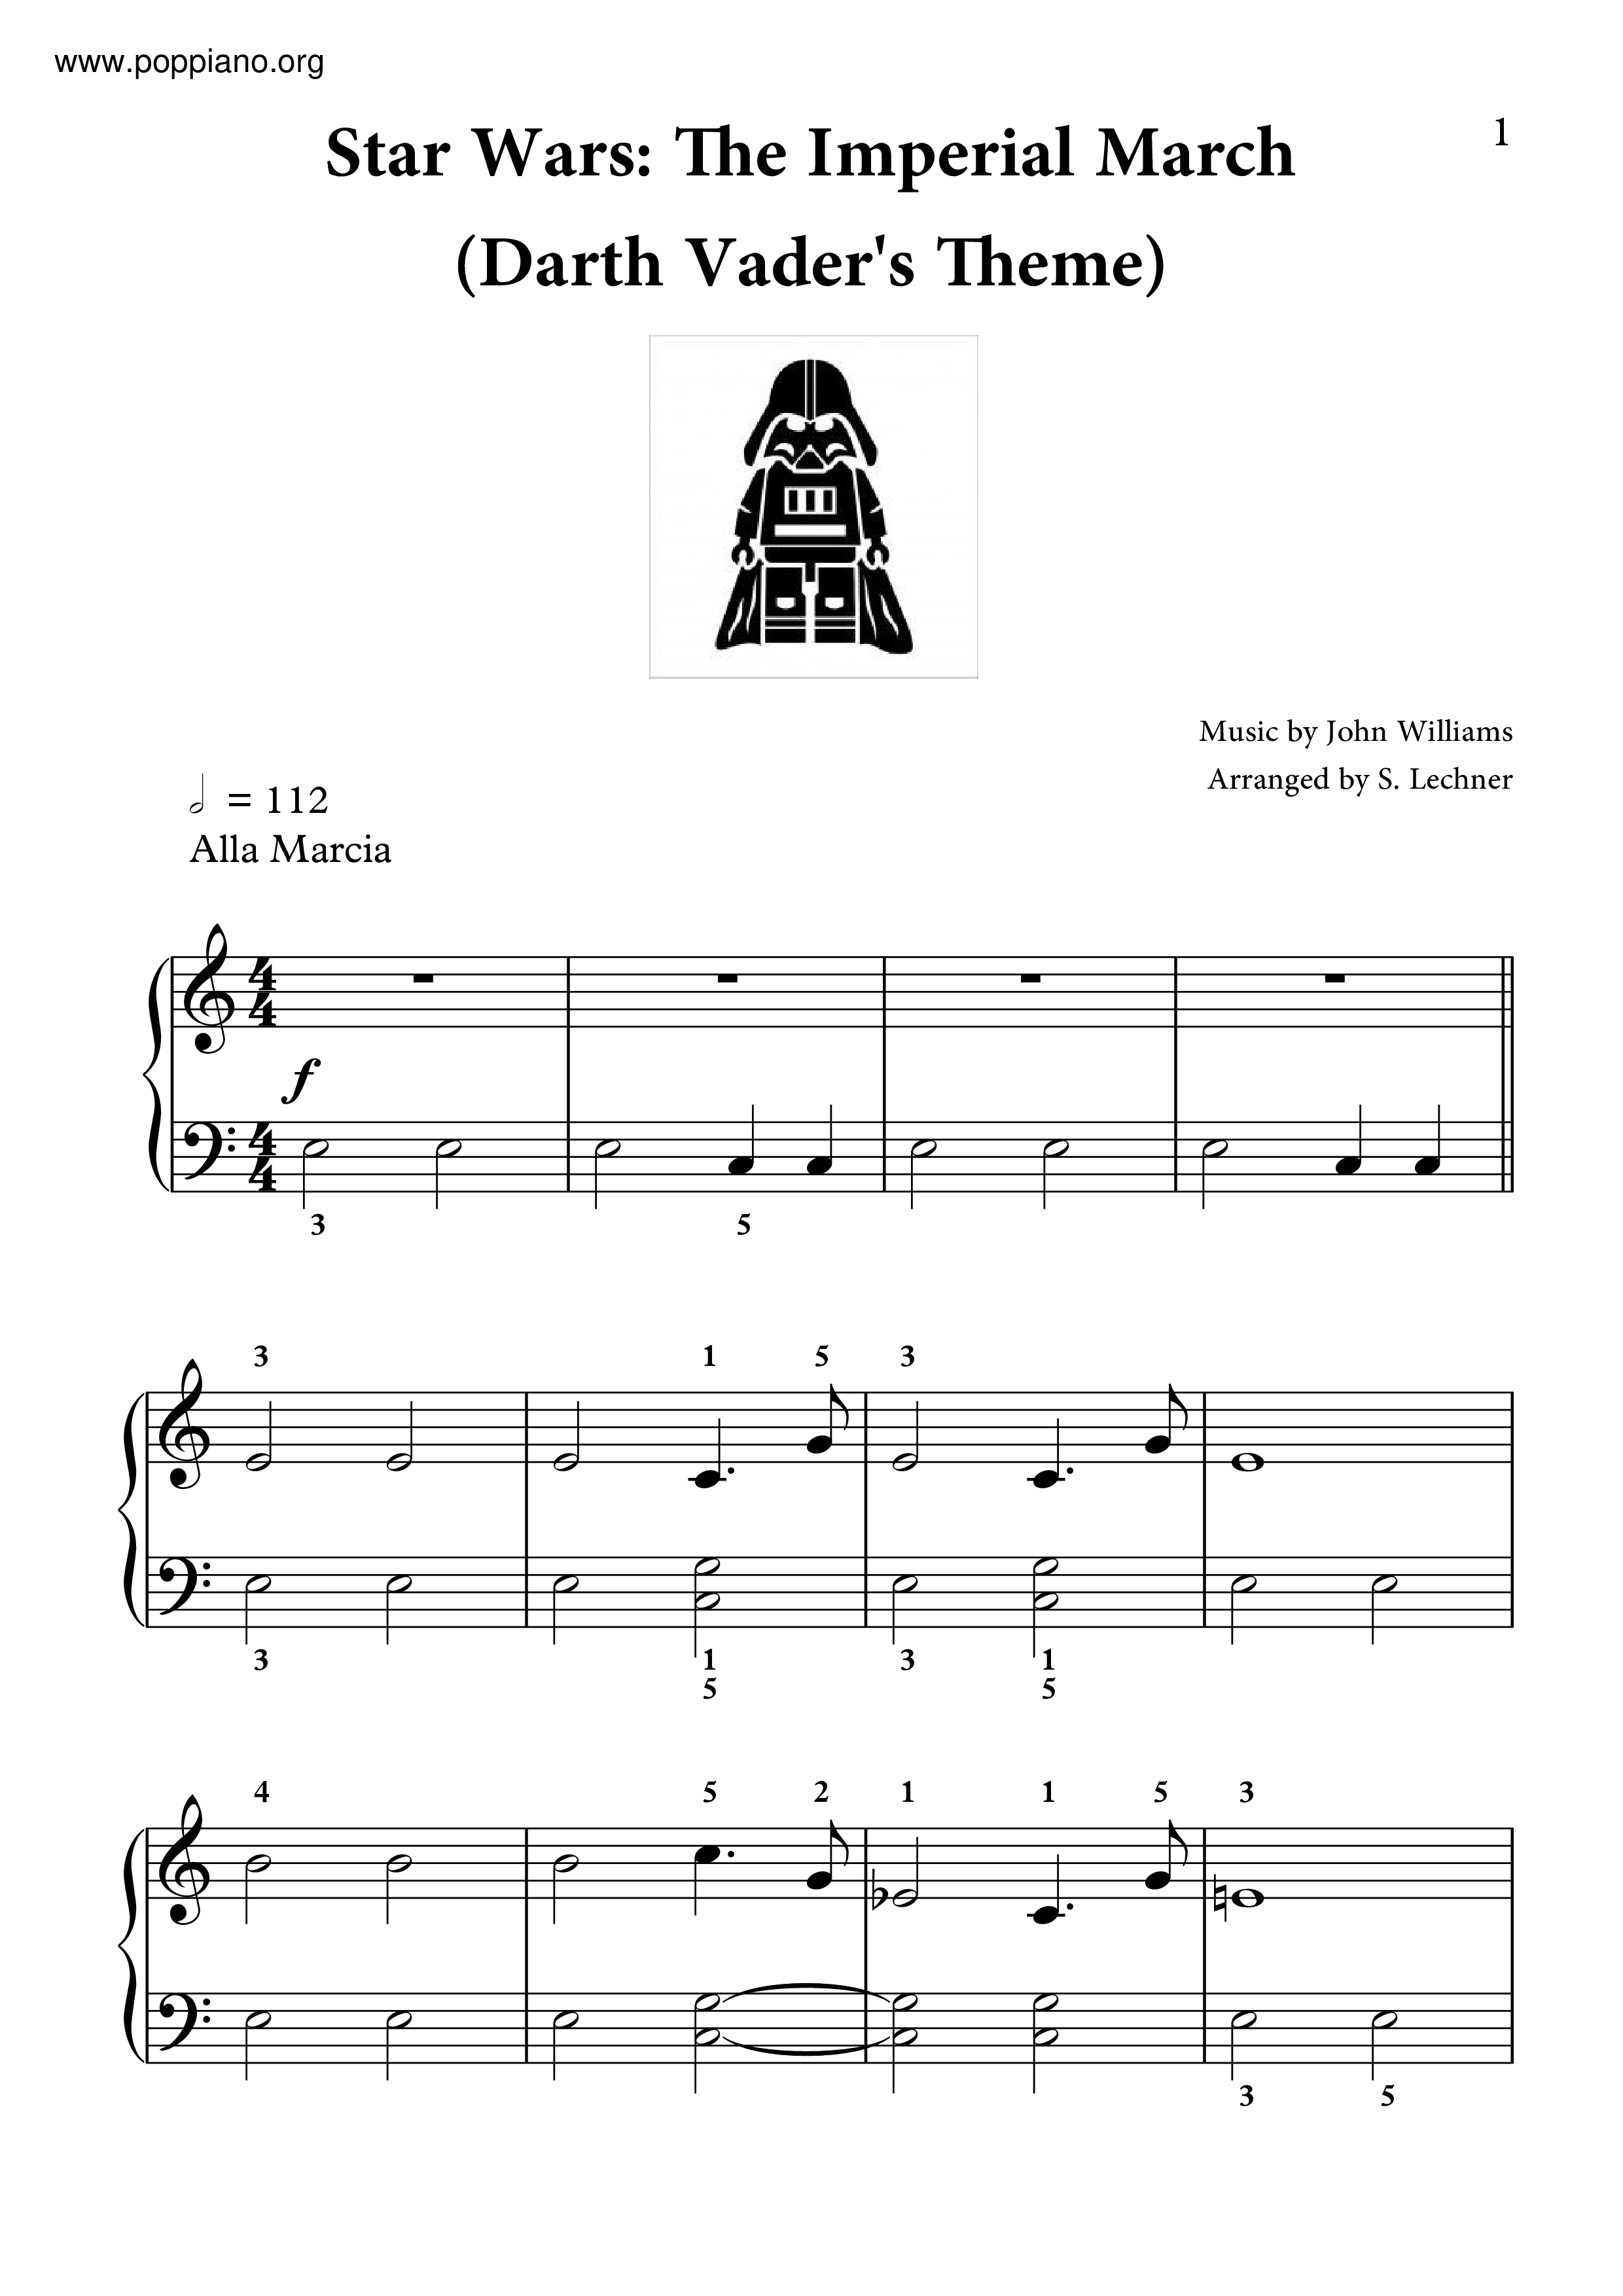 Star Wars - The Imperial March Score